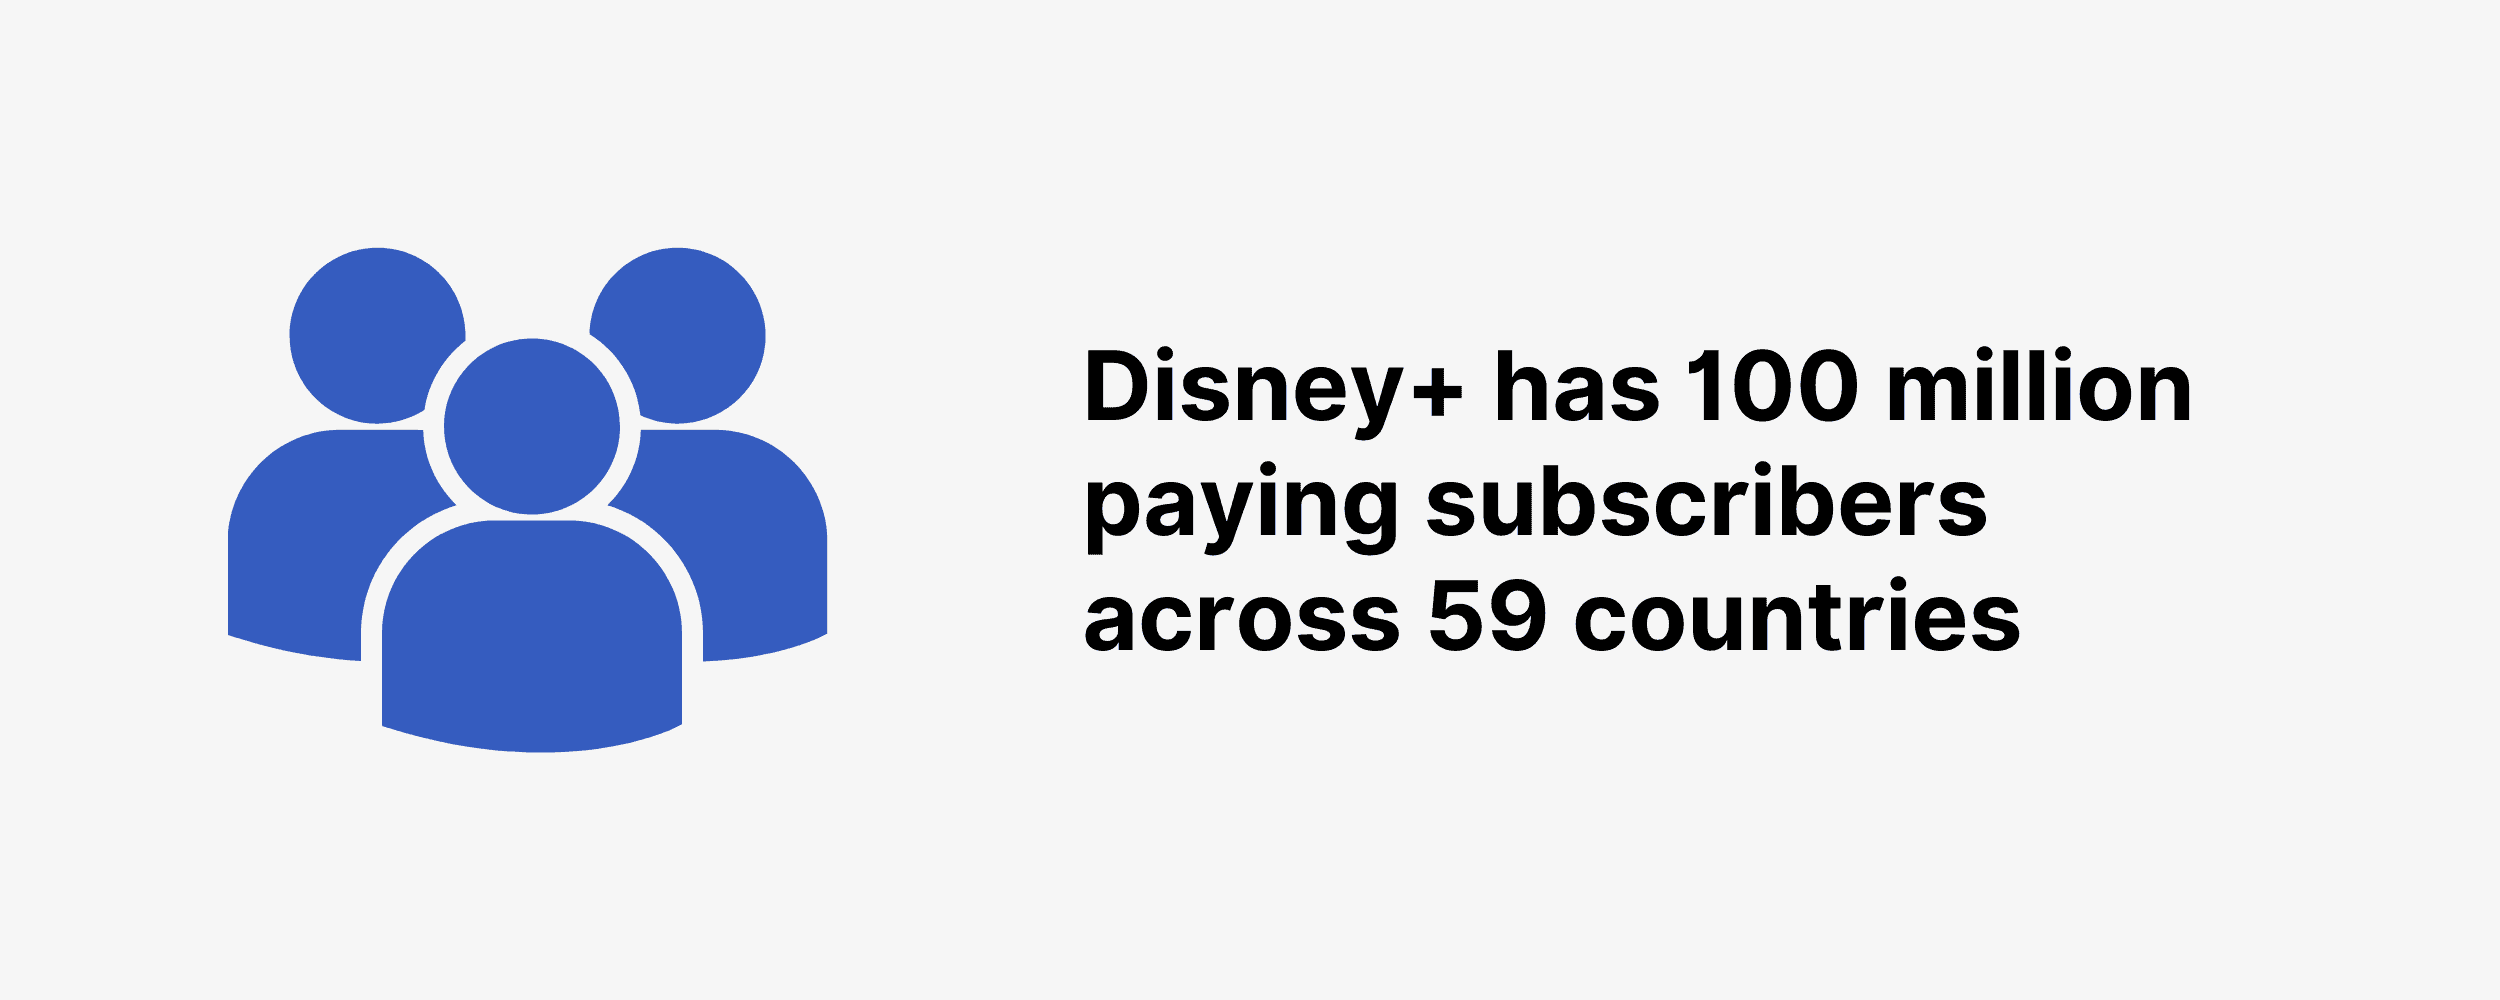 Disney+ has 100 million paying subscribers across 59 countries